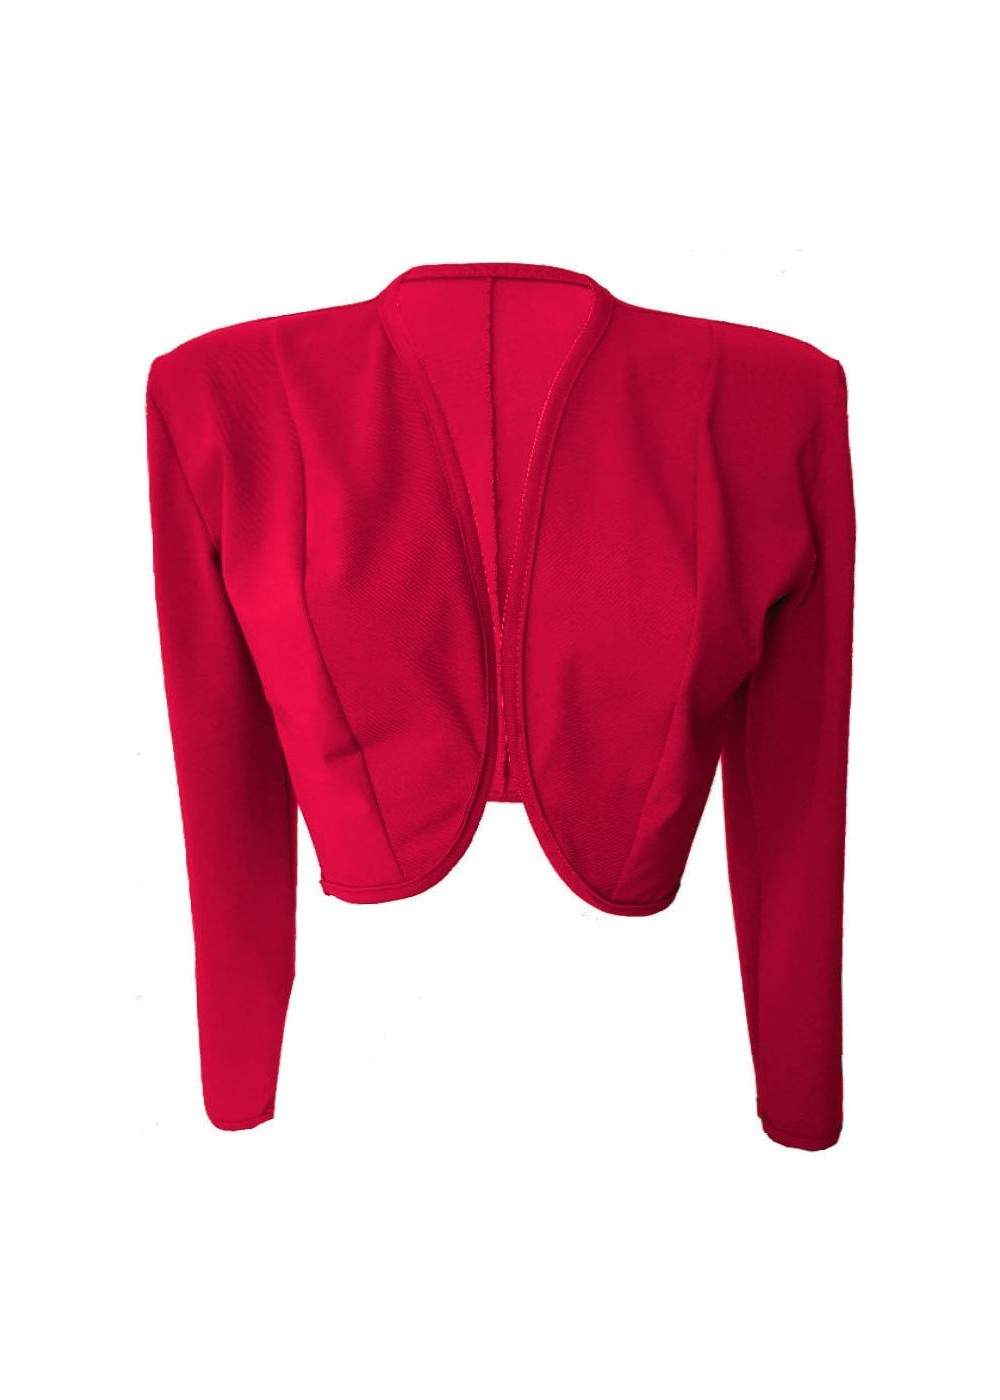 Sizes 34 - 52 Red Cotton Stretch Short Jacket from Magdeburg Production - 